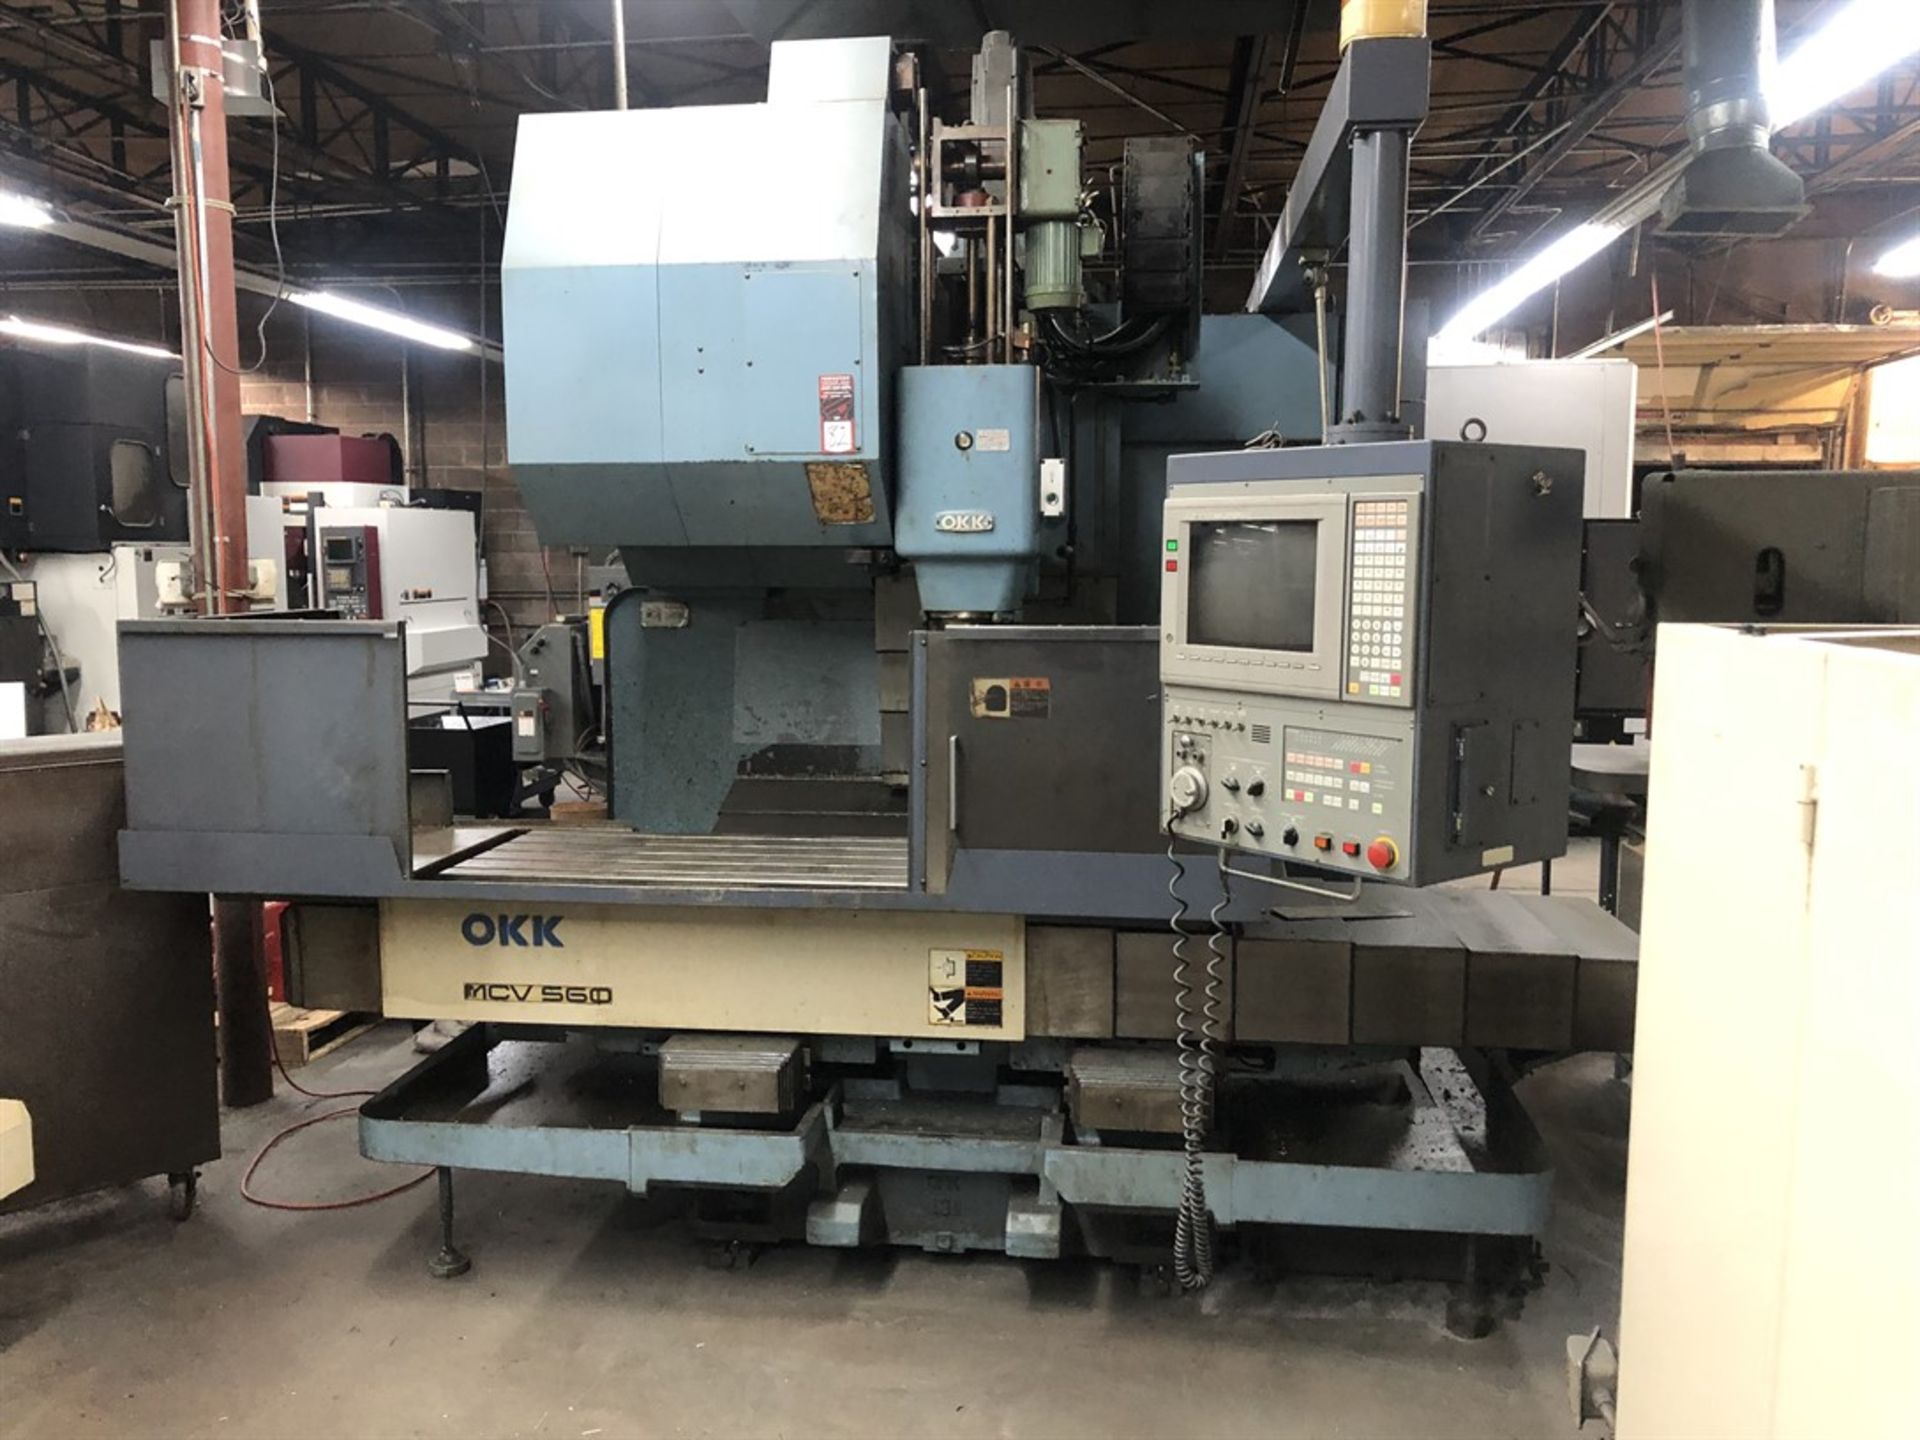 OKK MCV-560 Vertical Machining Center, s/n 186, Neomatic Control, 22” x 51” Table, CT50 Spindle